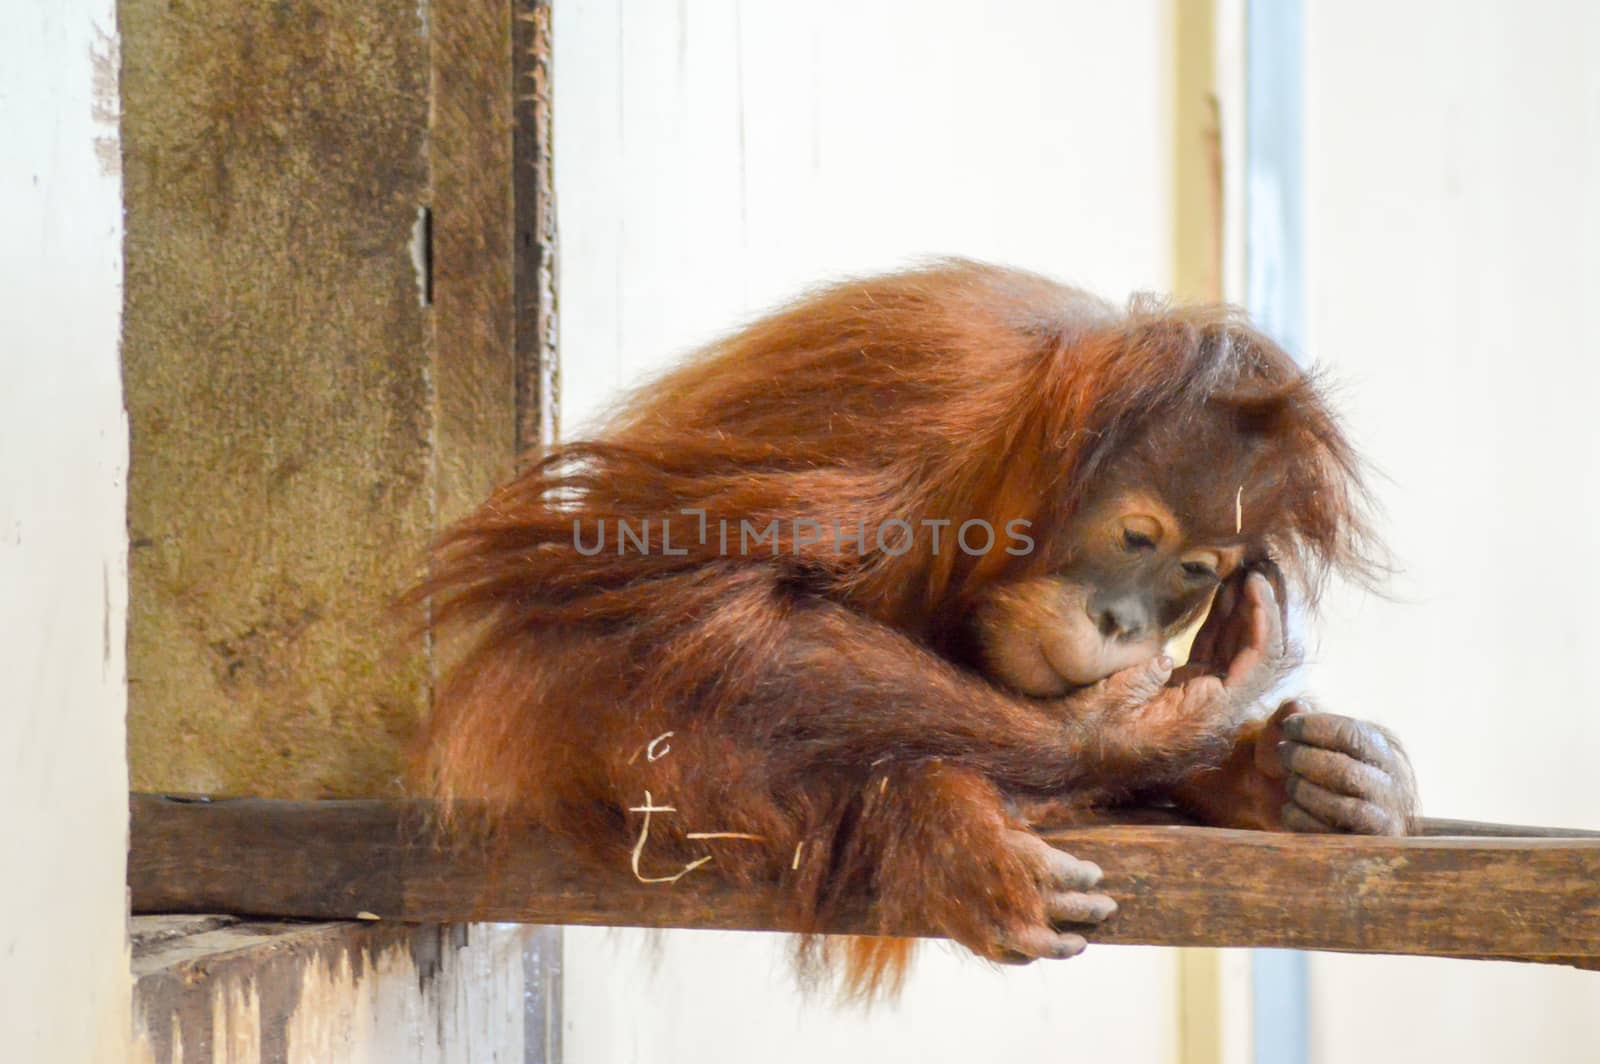 Young Monkey Orang-Outang  by Philou1000